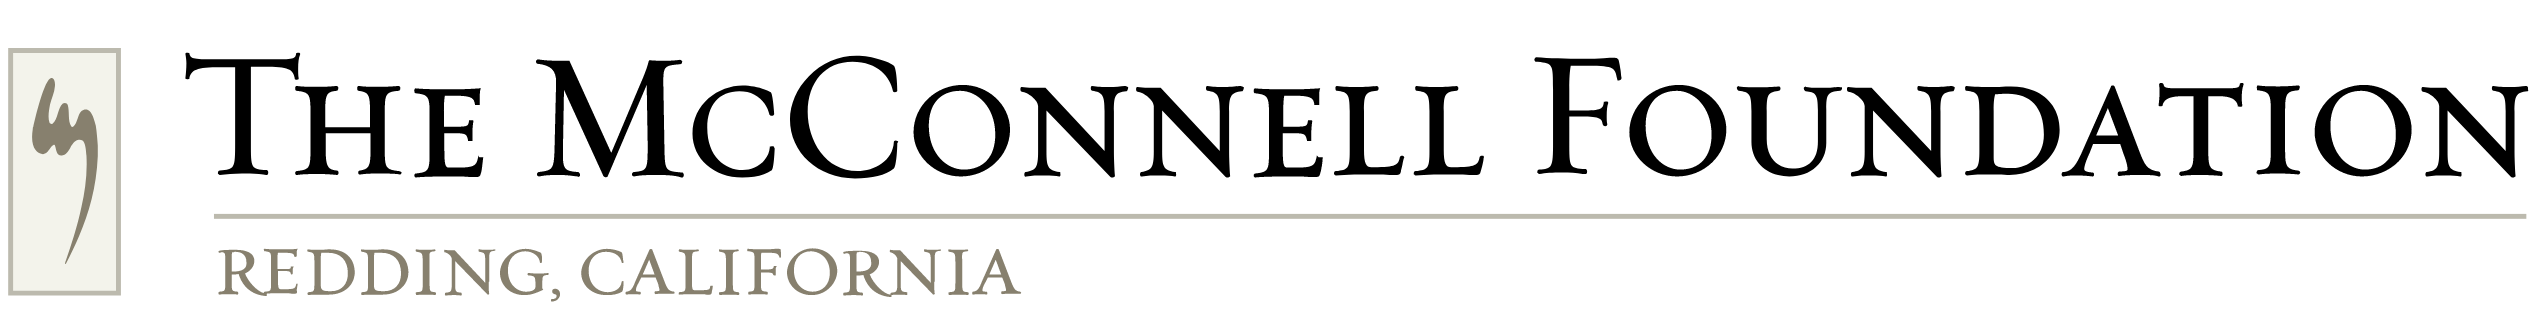 The McConnell Foundation logo